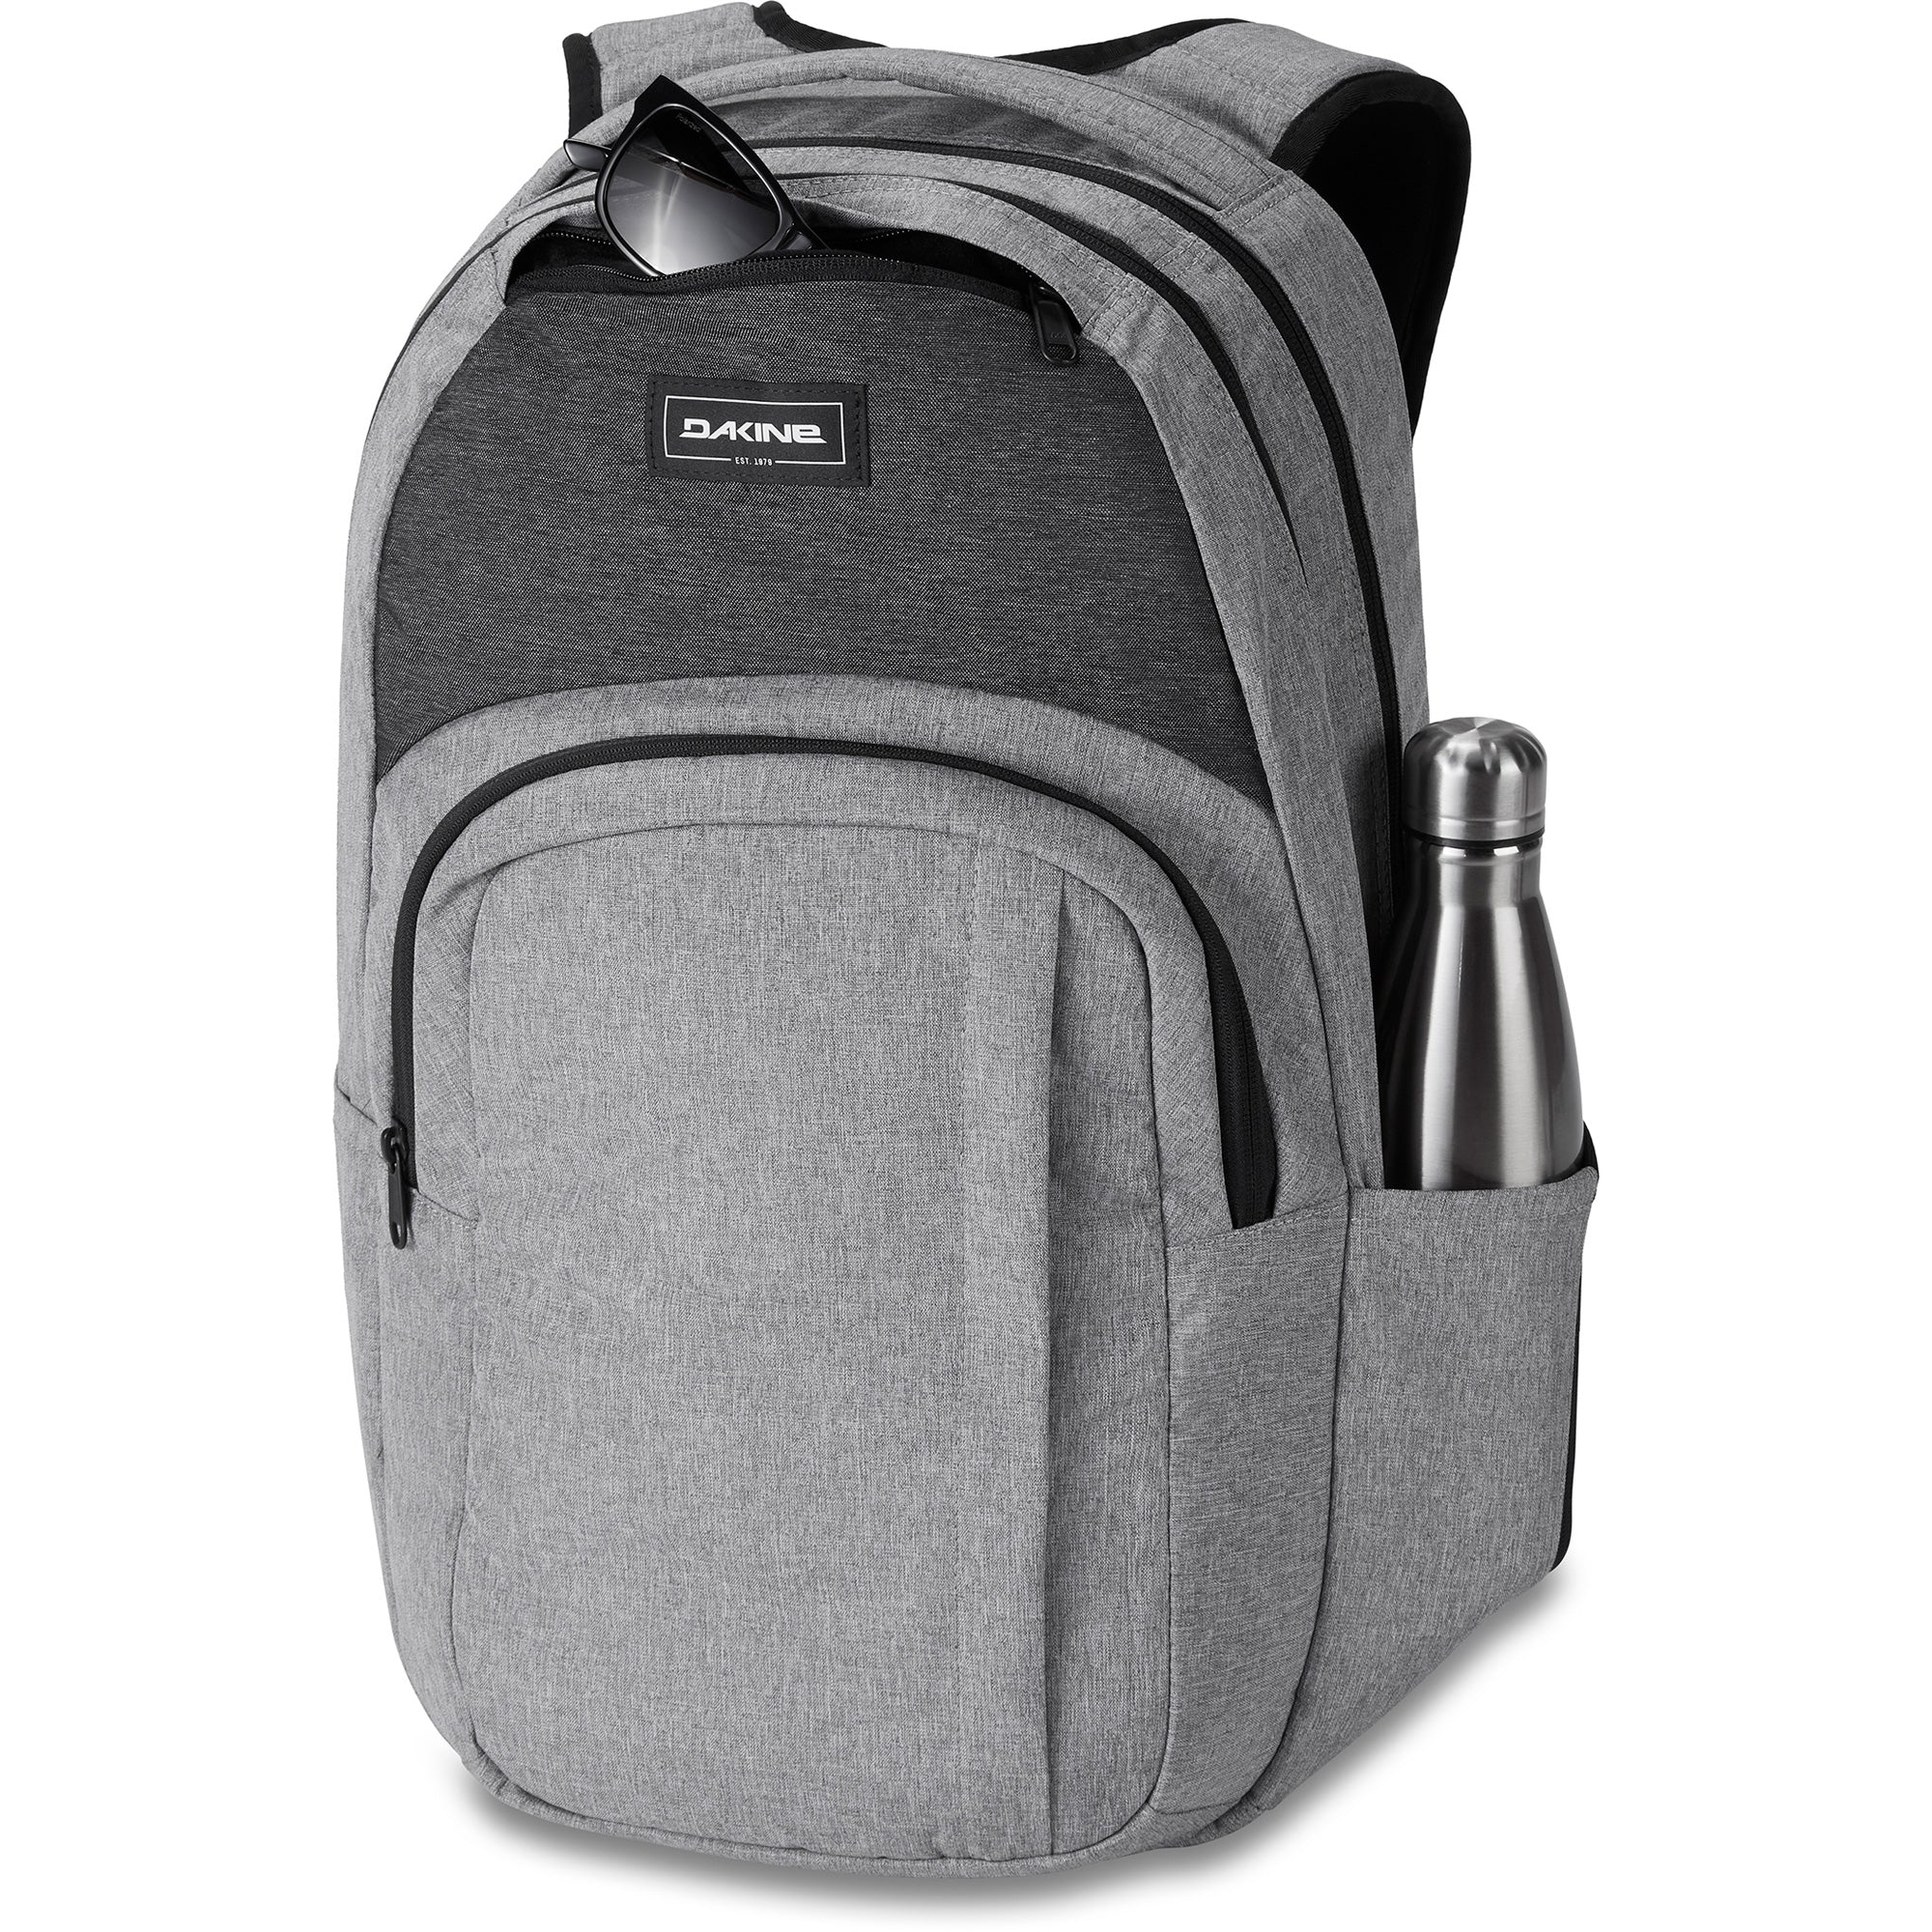 Unlock Wilderness' choice in the Dakine Vs North Face comparison, the Campus L 33L Backpack by Dakine